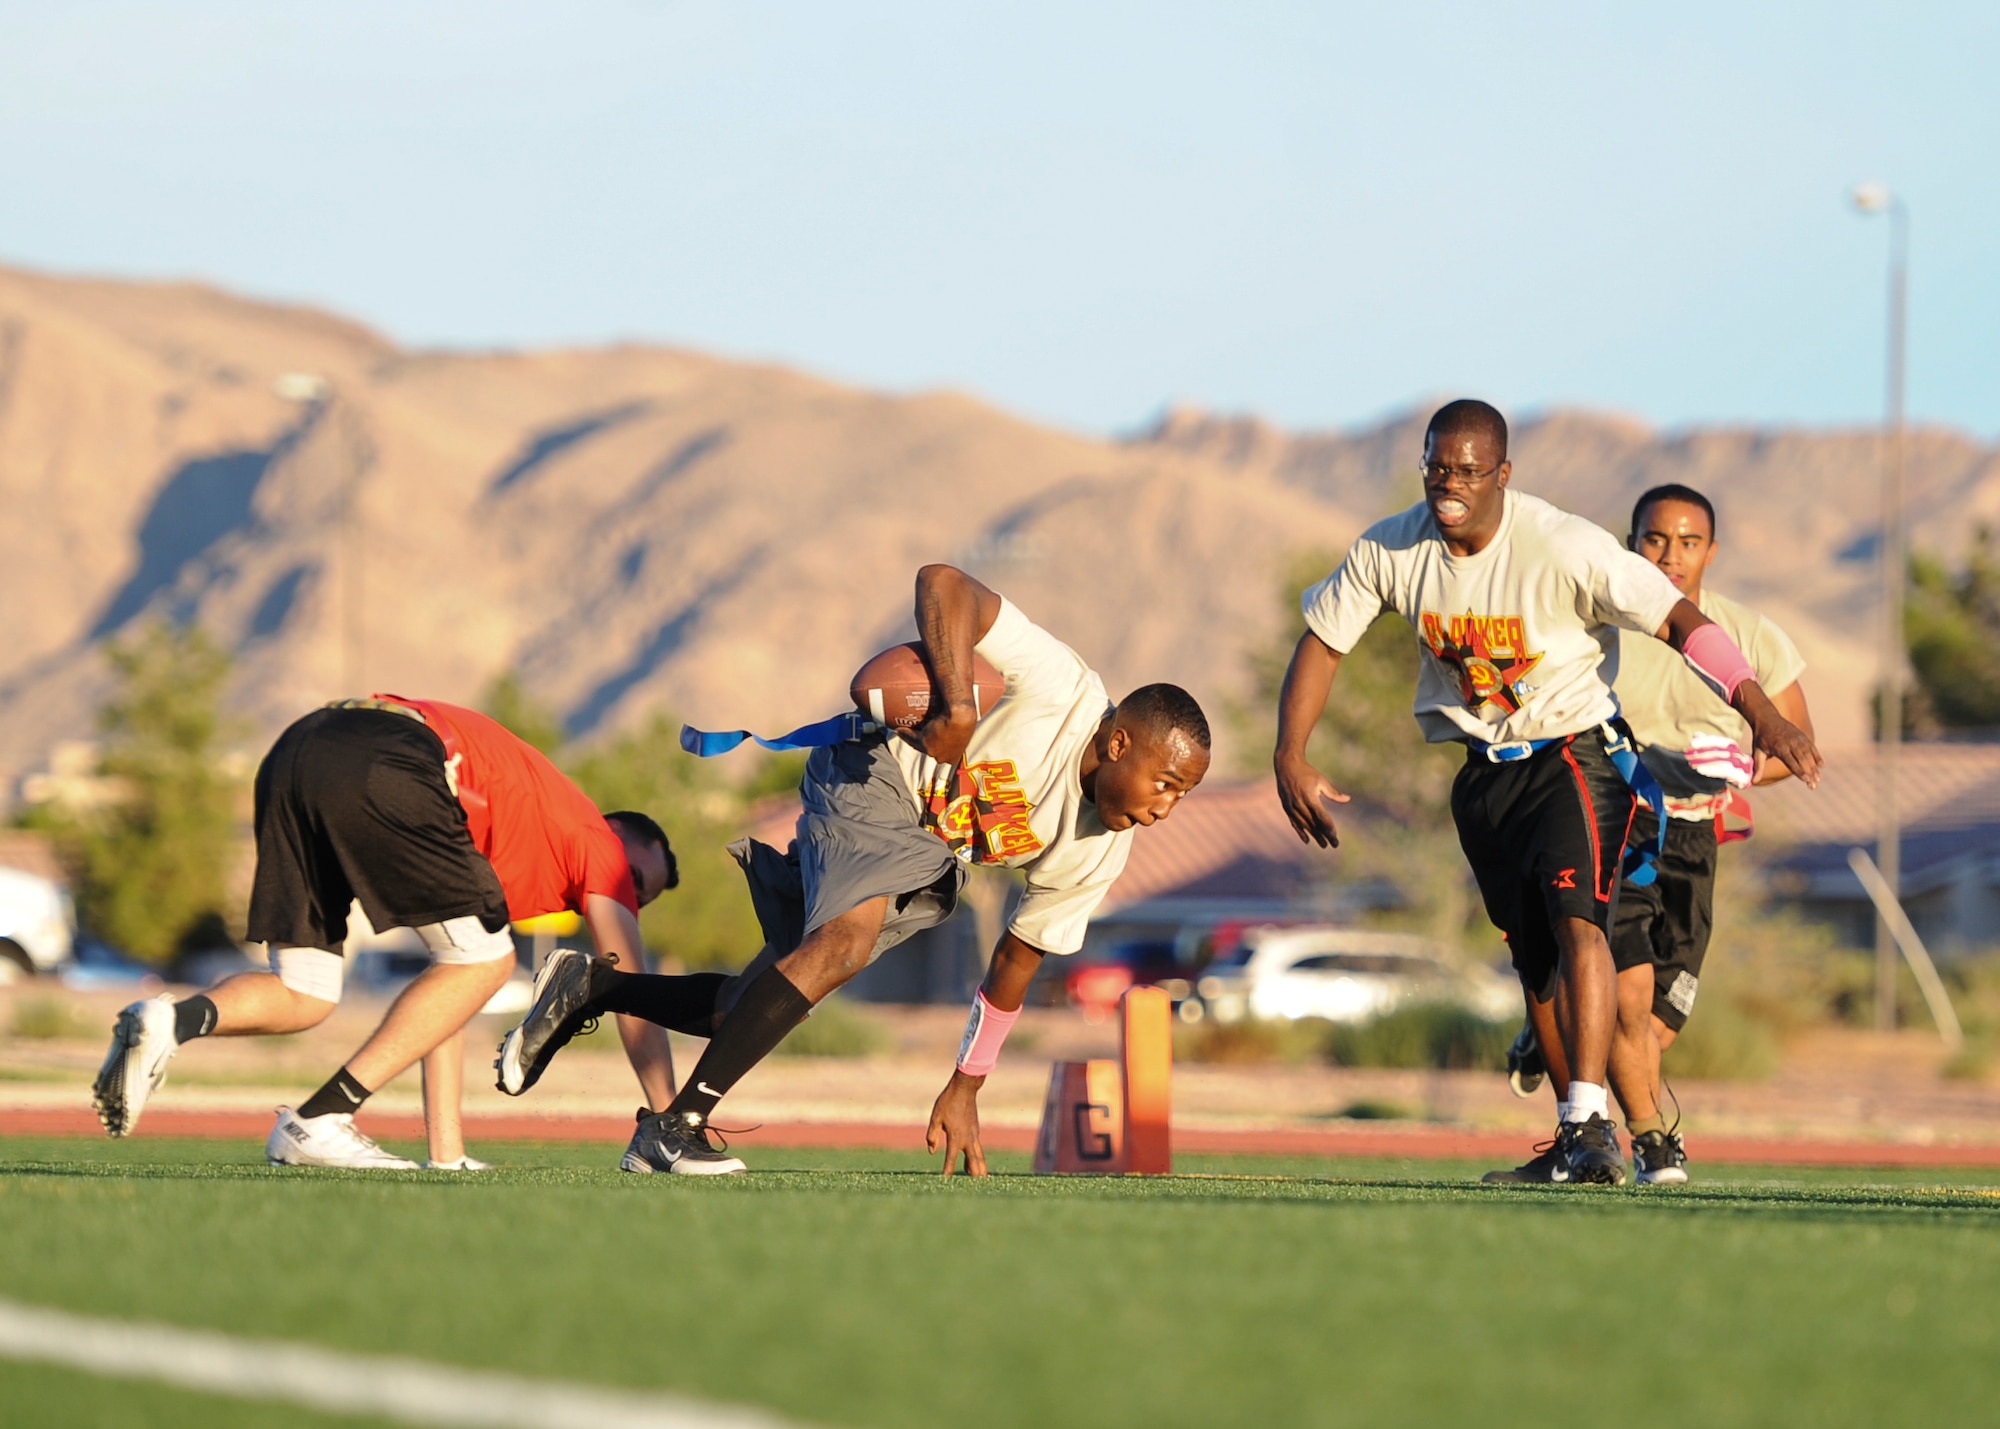 A member of the 757th Aircraft Maintenance Squadron Flankers team plunges toward the goal line during their game against the 757th AMXS Thunder team at Nellis Air Force Base, Nev., Oct. 6, 2014. The flag football season kicked off at Nellis AFB Oct. 1.(U.S. Air Force photo by Airman 1st Class Mikaley Towle)